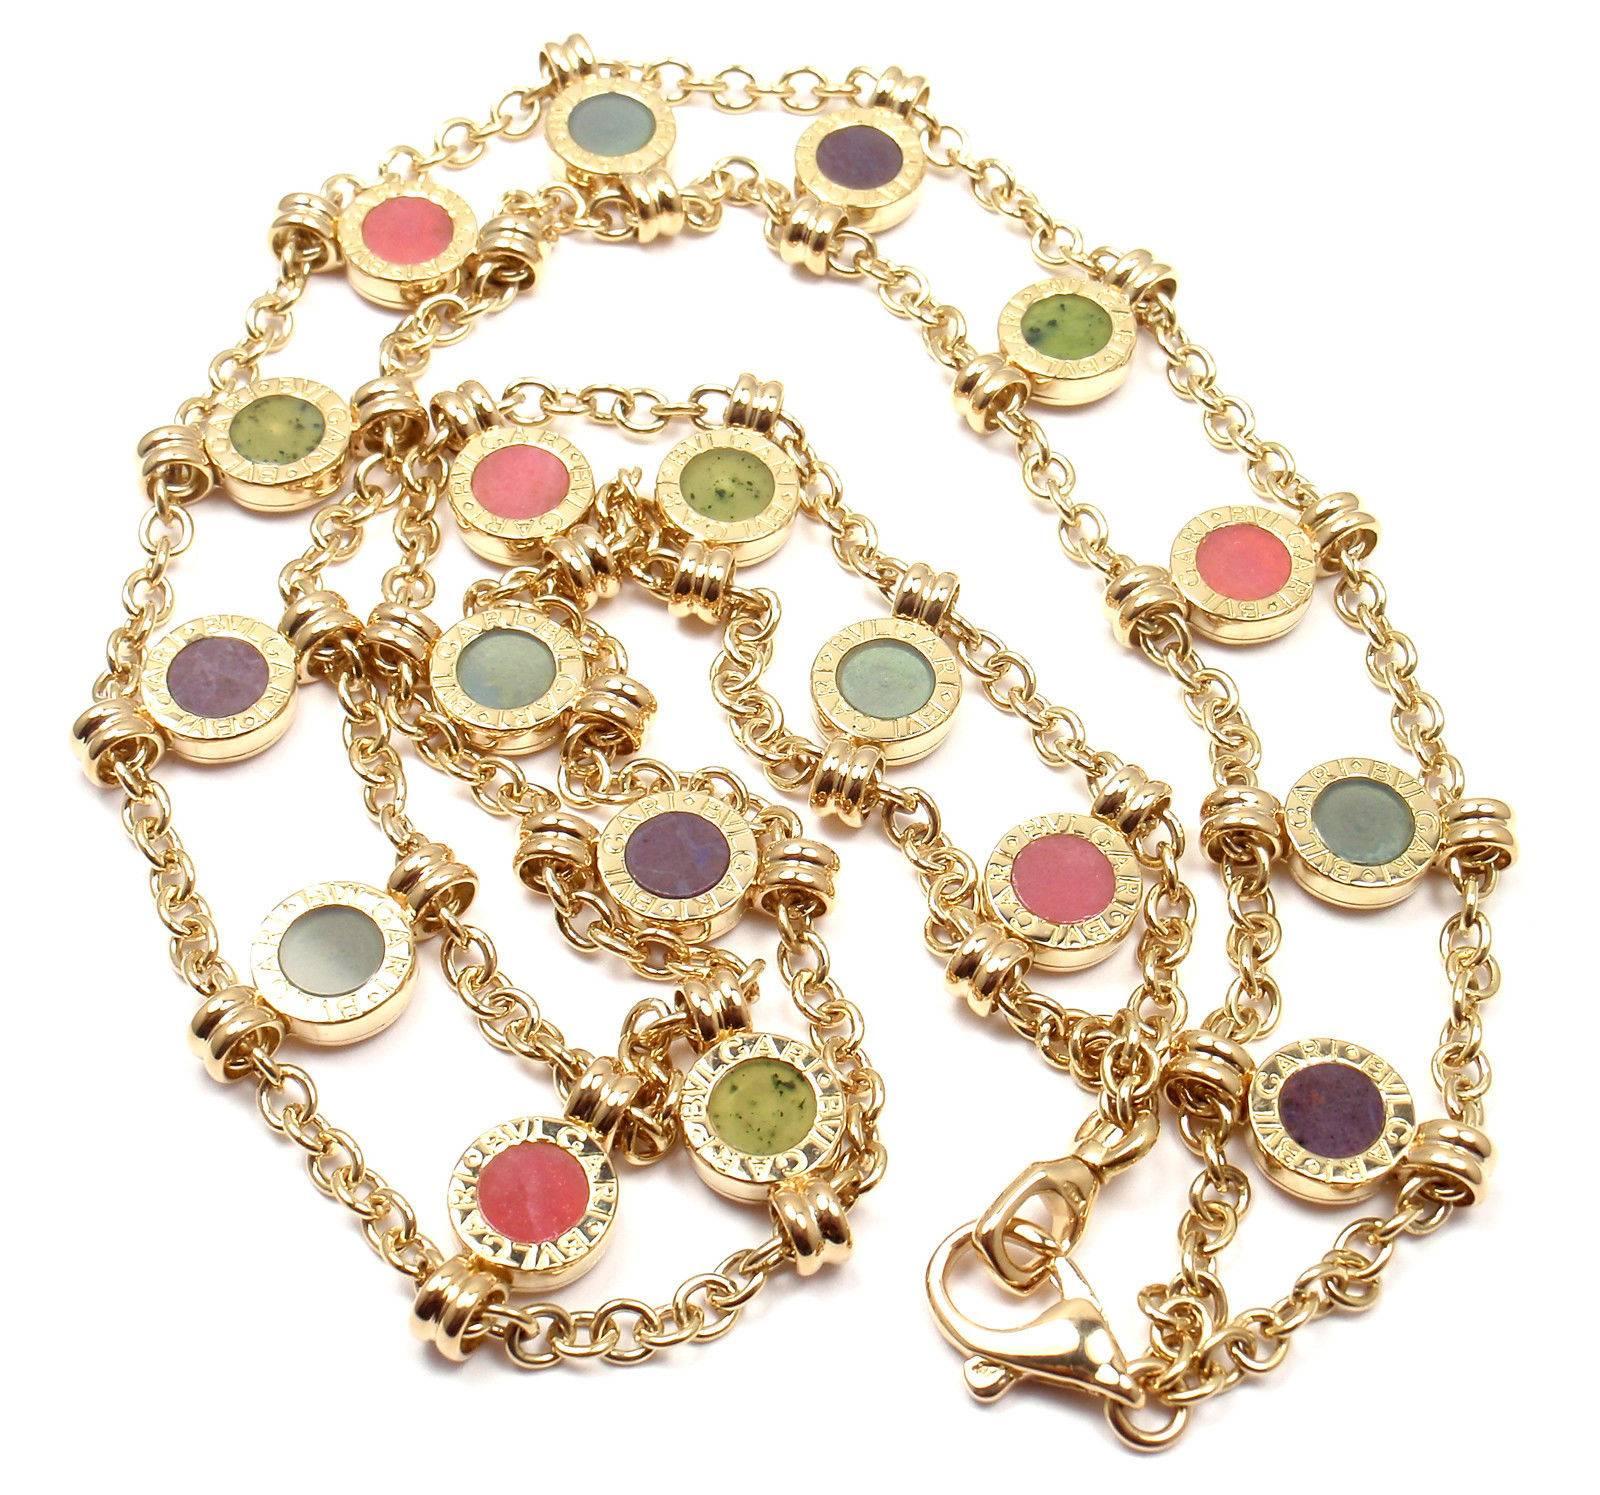 18k Yellow Gold Coral Amethyst Again Link Necklace by Bulgari.  
With 5 round corals, 2 round agate, 9 amethysts

Details:  
Length: 16"
Width: 20mm
Weight: 76.8 grams
Stamped Hallmarks: Bulgari, 750

*Free Shipping within the United States* 